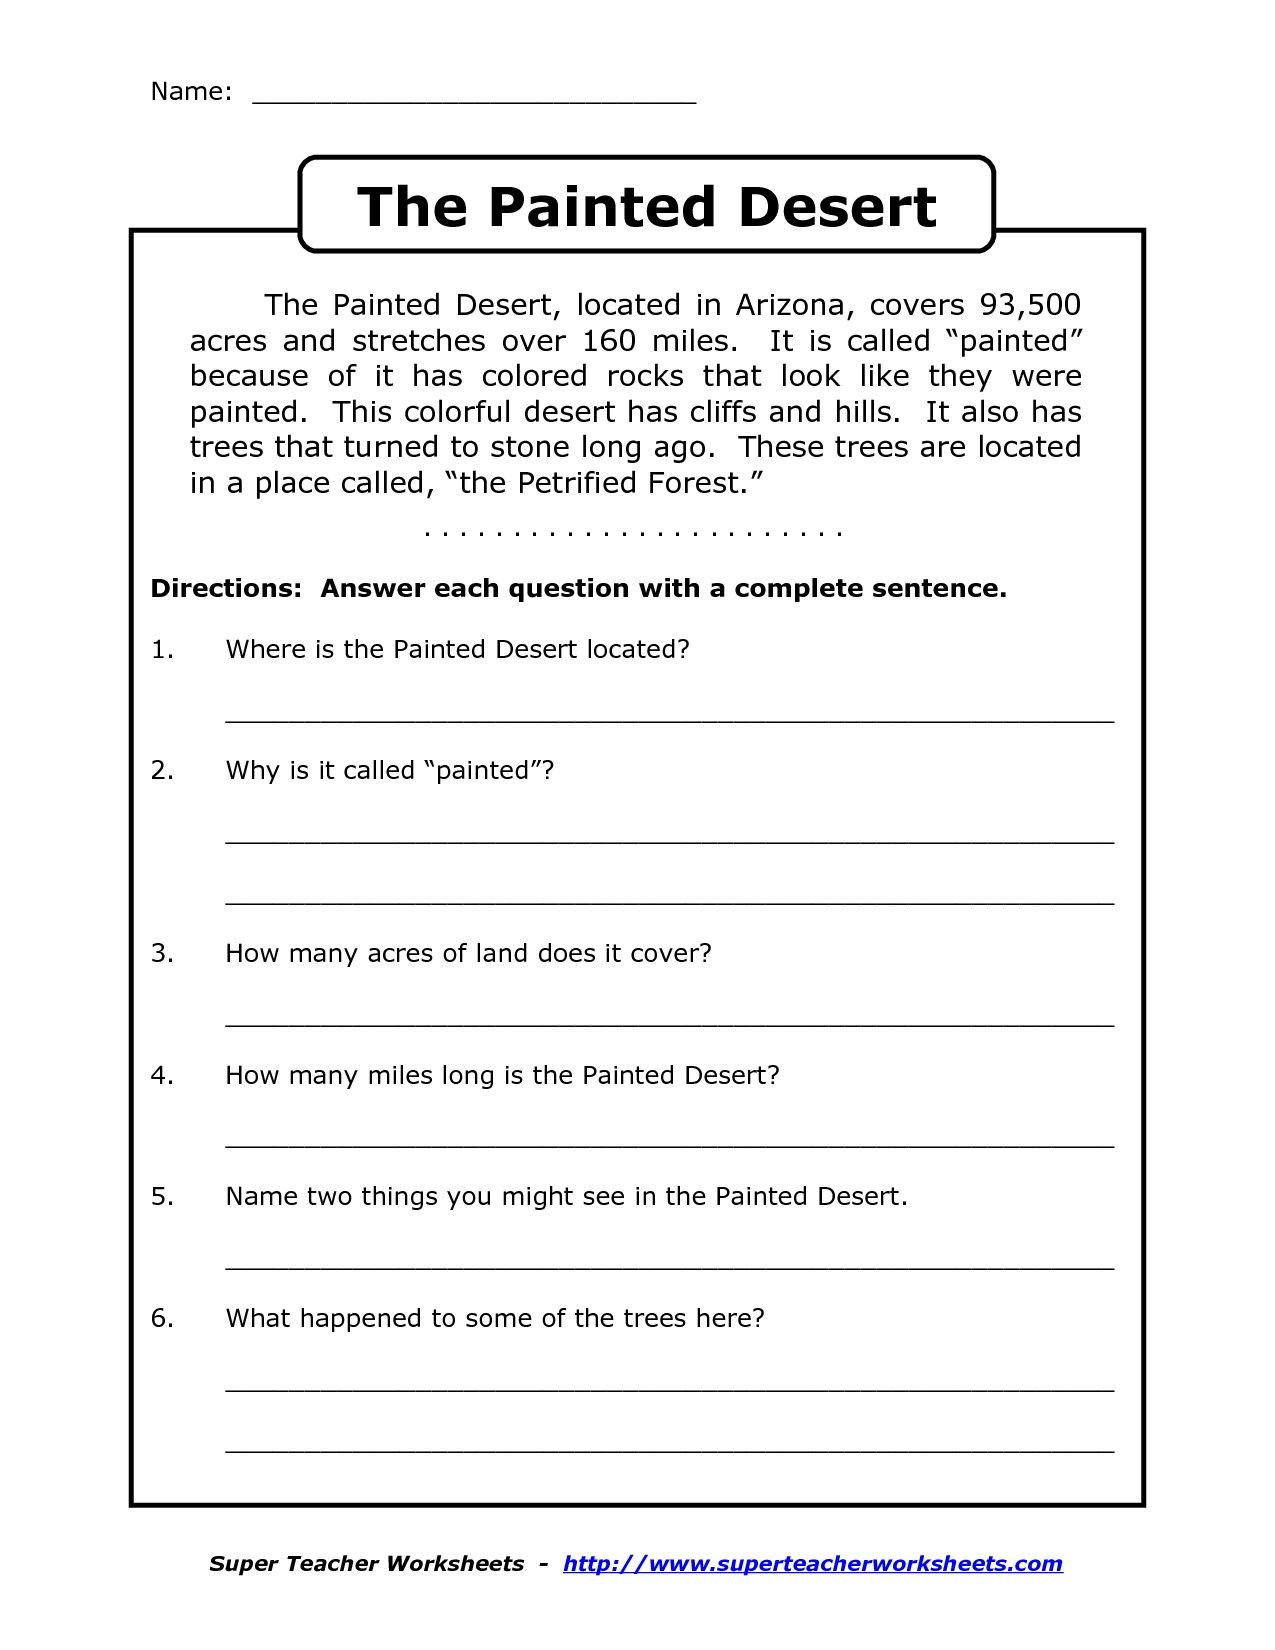 Editing Worksheets 3rd Grade Prehension Worksheet for 1st Grade Y2 P3 the Painted